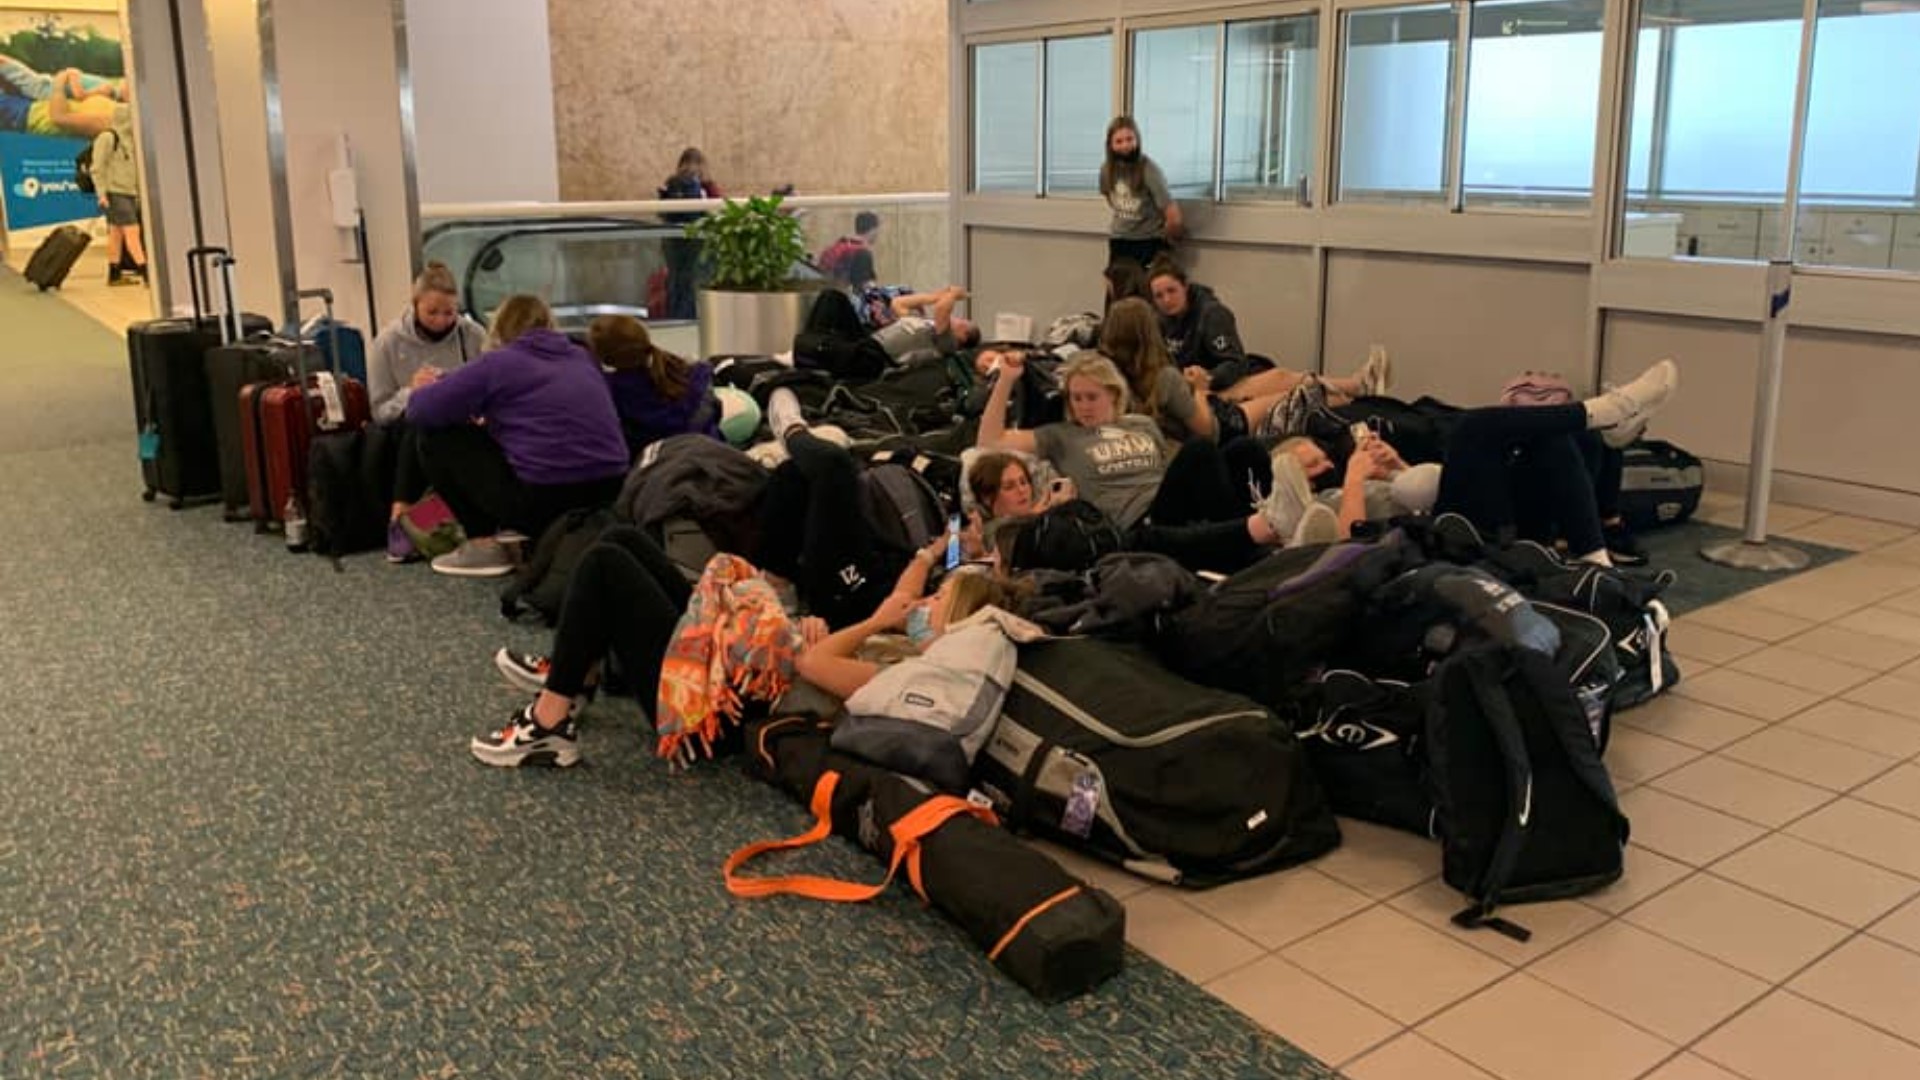 The recent tale of the University of Northwestern softball team shows how weather disruptions can have a ripple effect, as travel demand soars again.